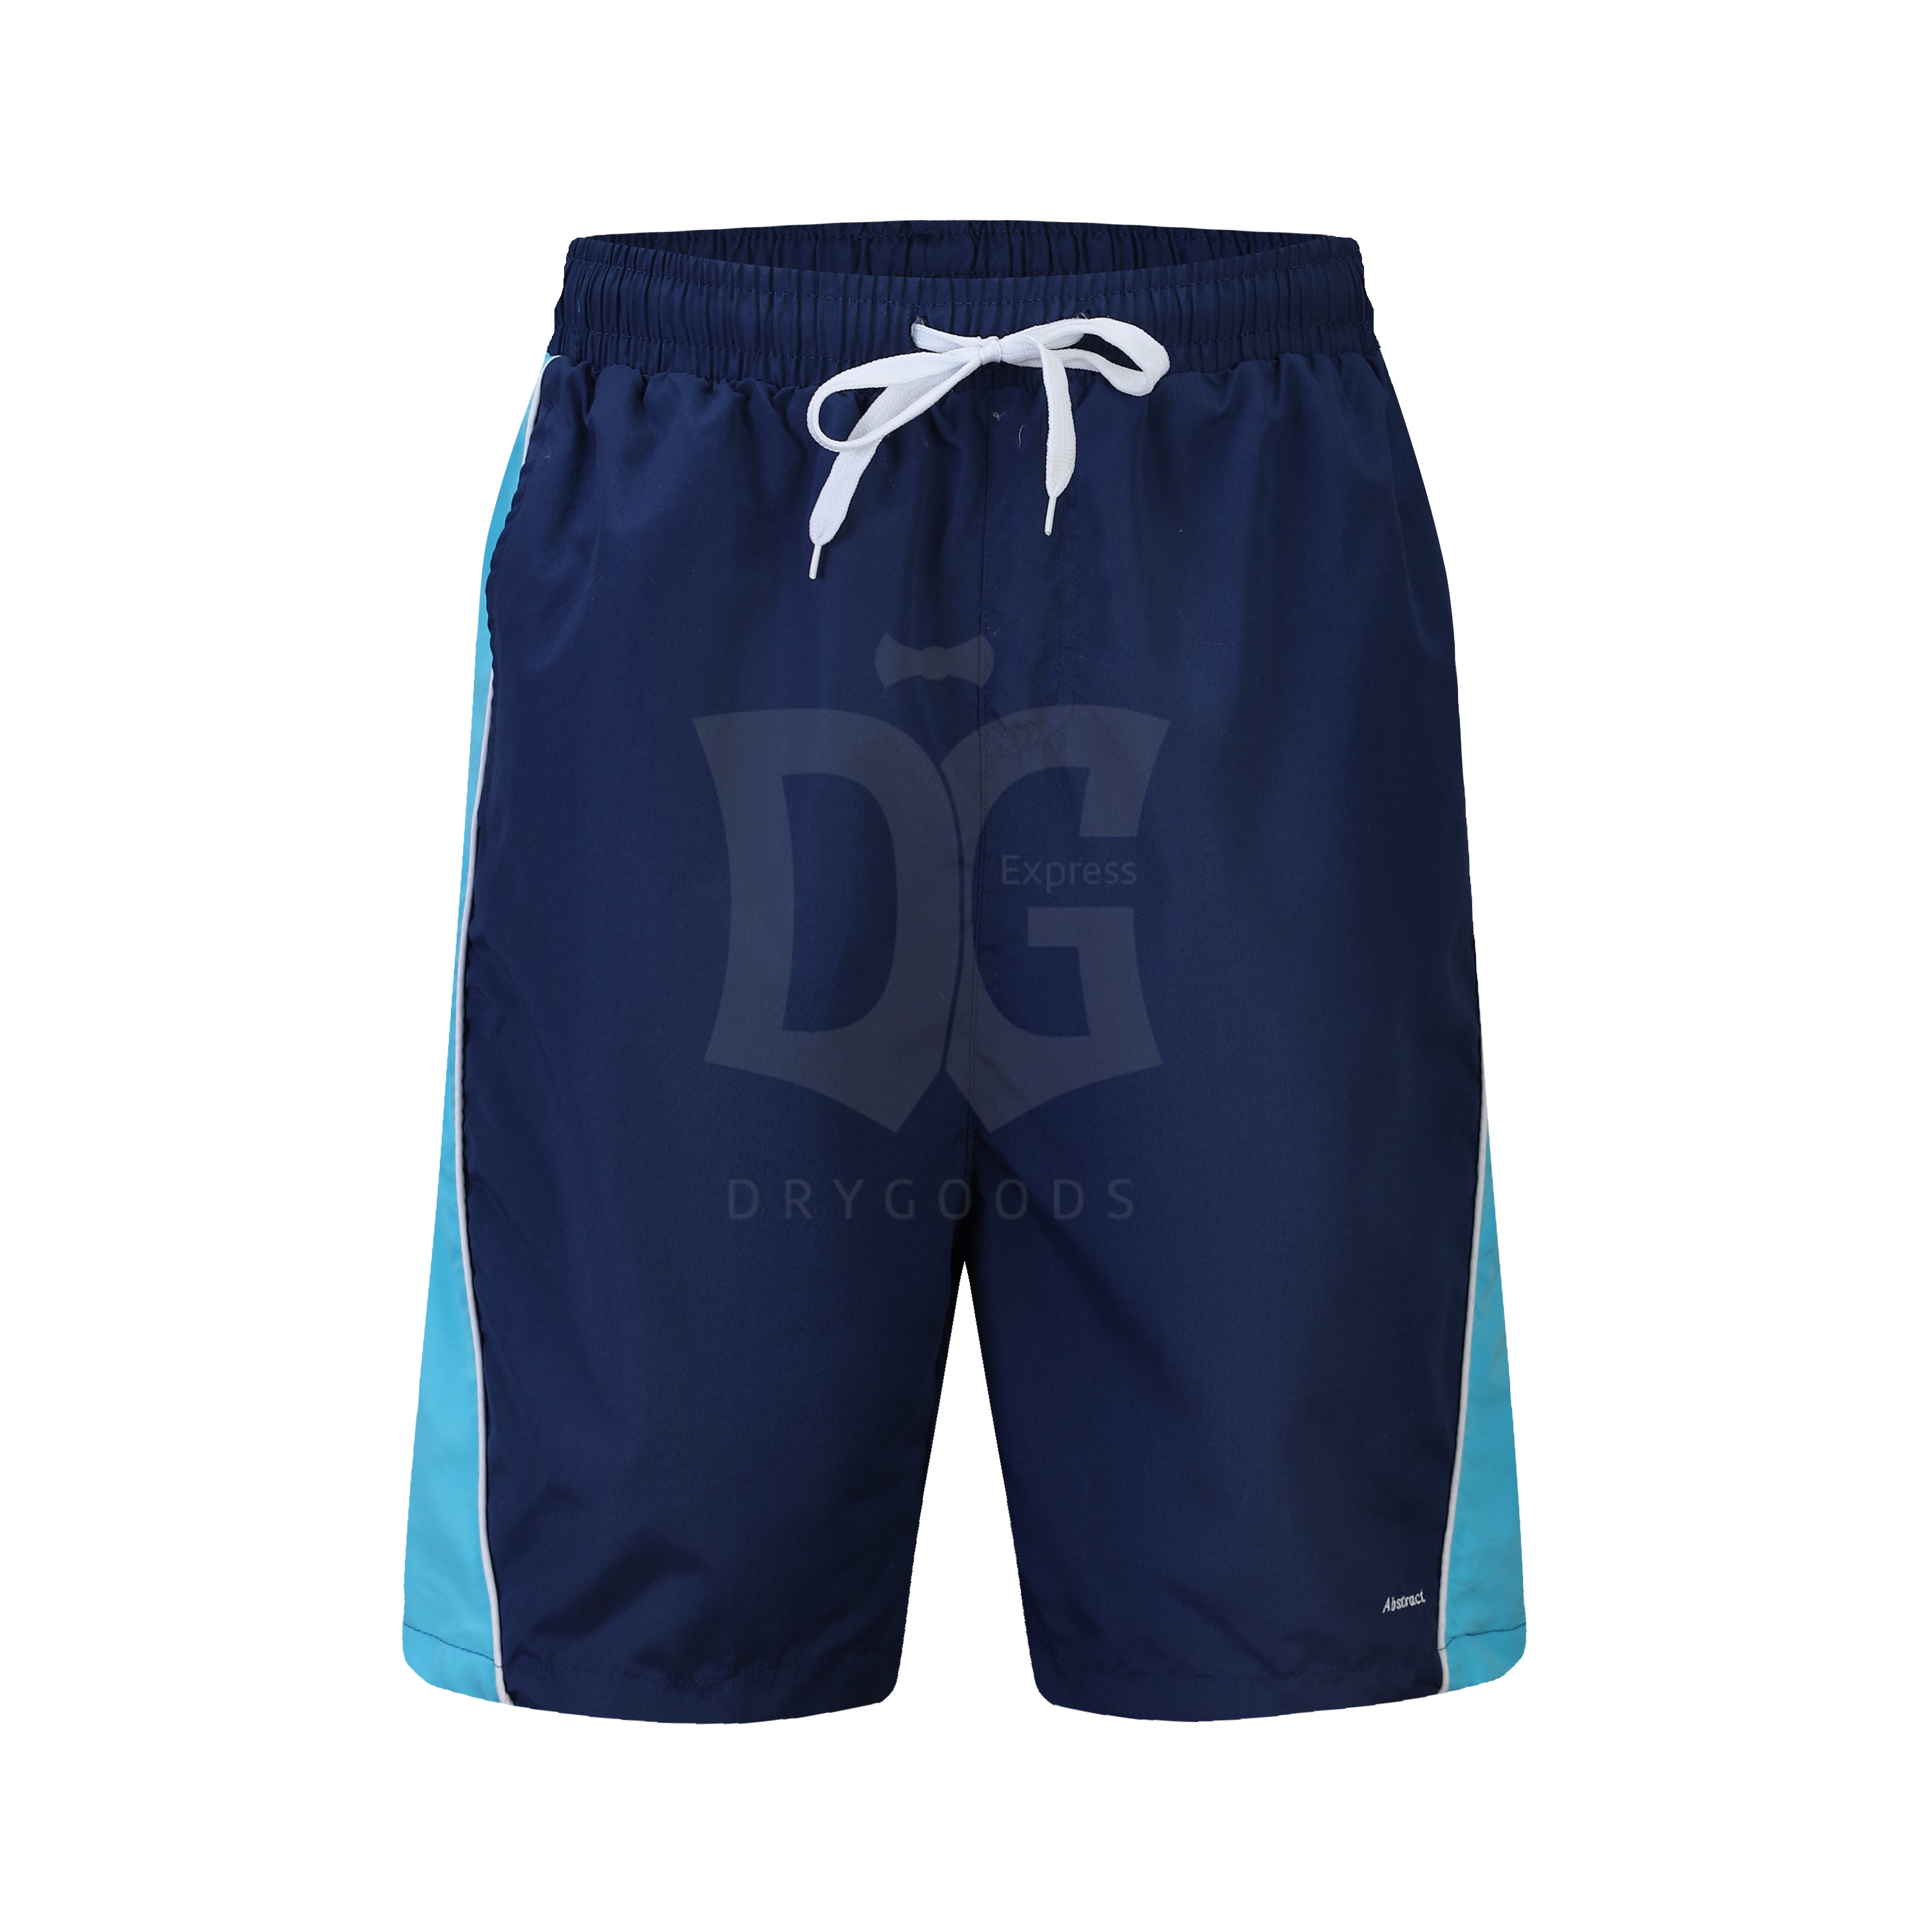 Abstract Men's Lt. Blue Bathing Suits